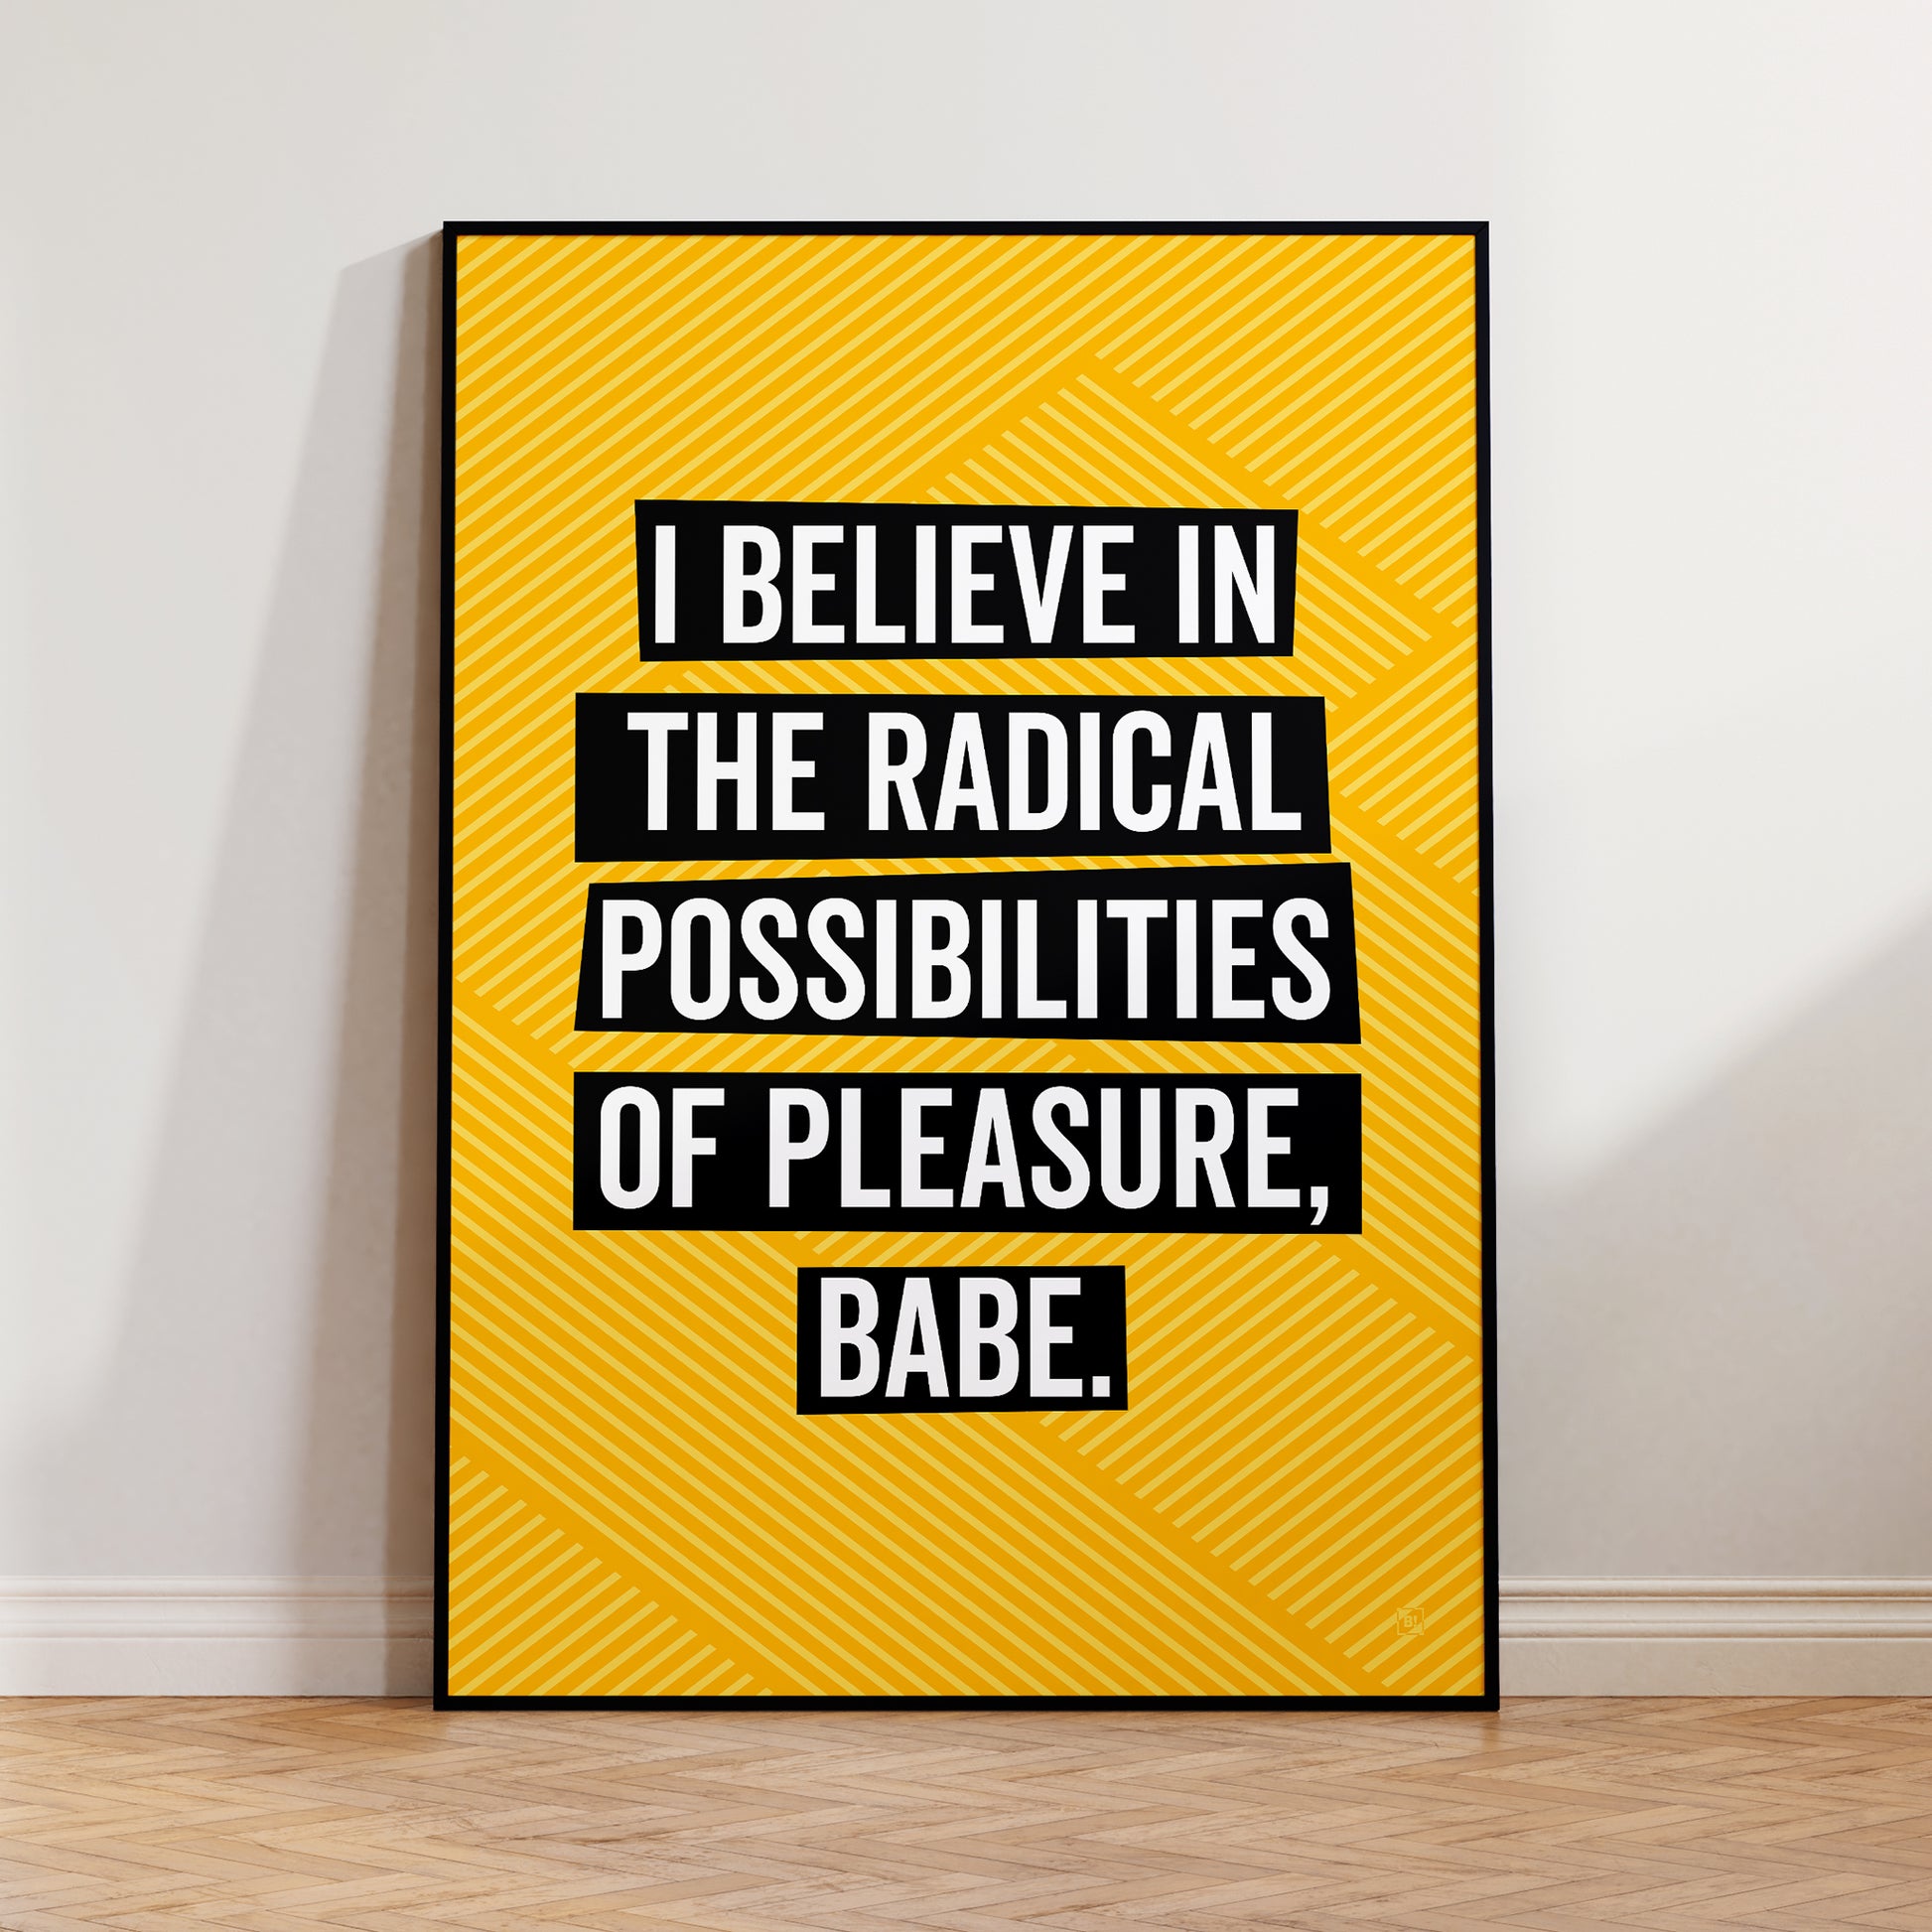 Be inspired by our golden yellow Bikini Kill "I Believe in the Radical Possibilities of Pleasure Babe" lyrics art print! This artwork has been printed using the giclée process on archival acid-free paper and is elegantly displayed in a modern black frame, highlighting its timeless beauty in every detail.